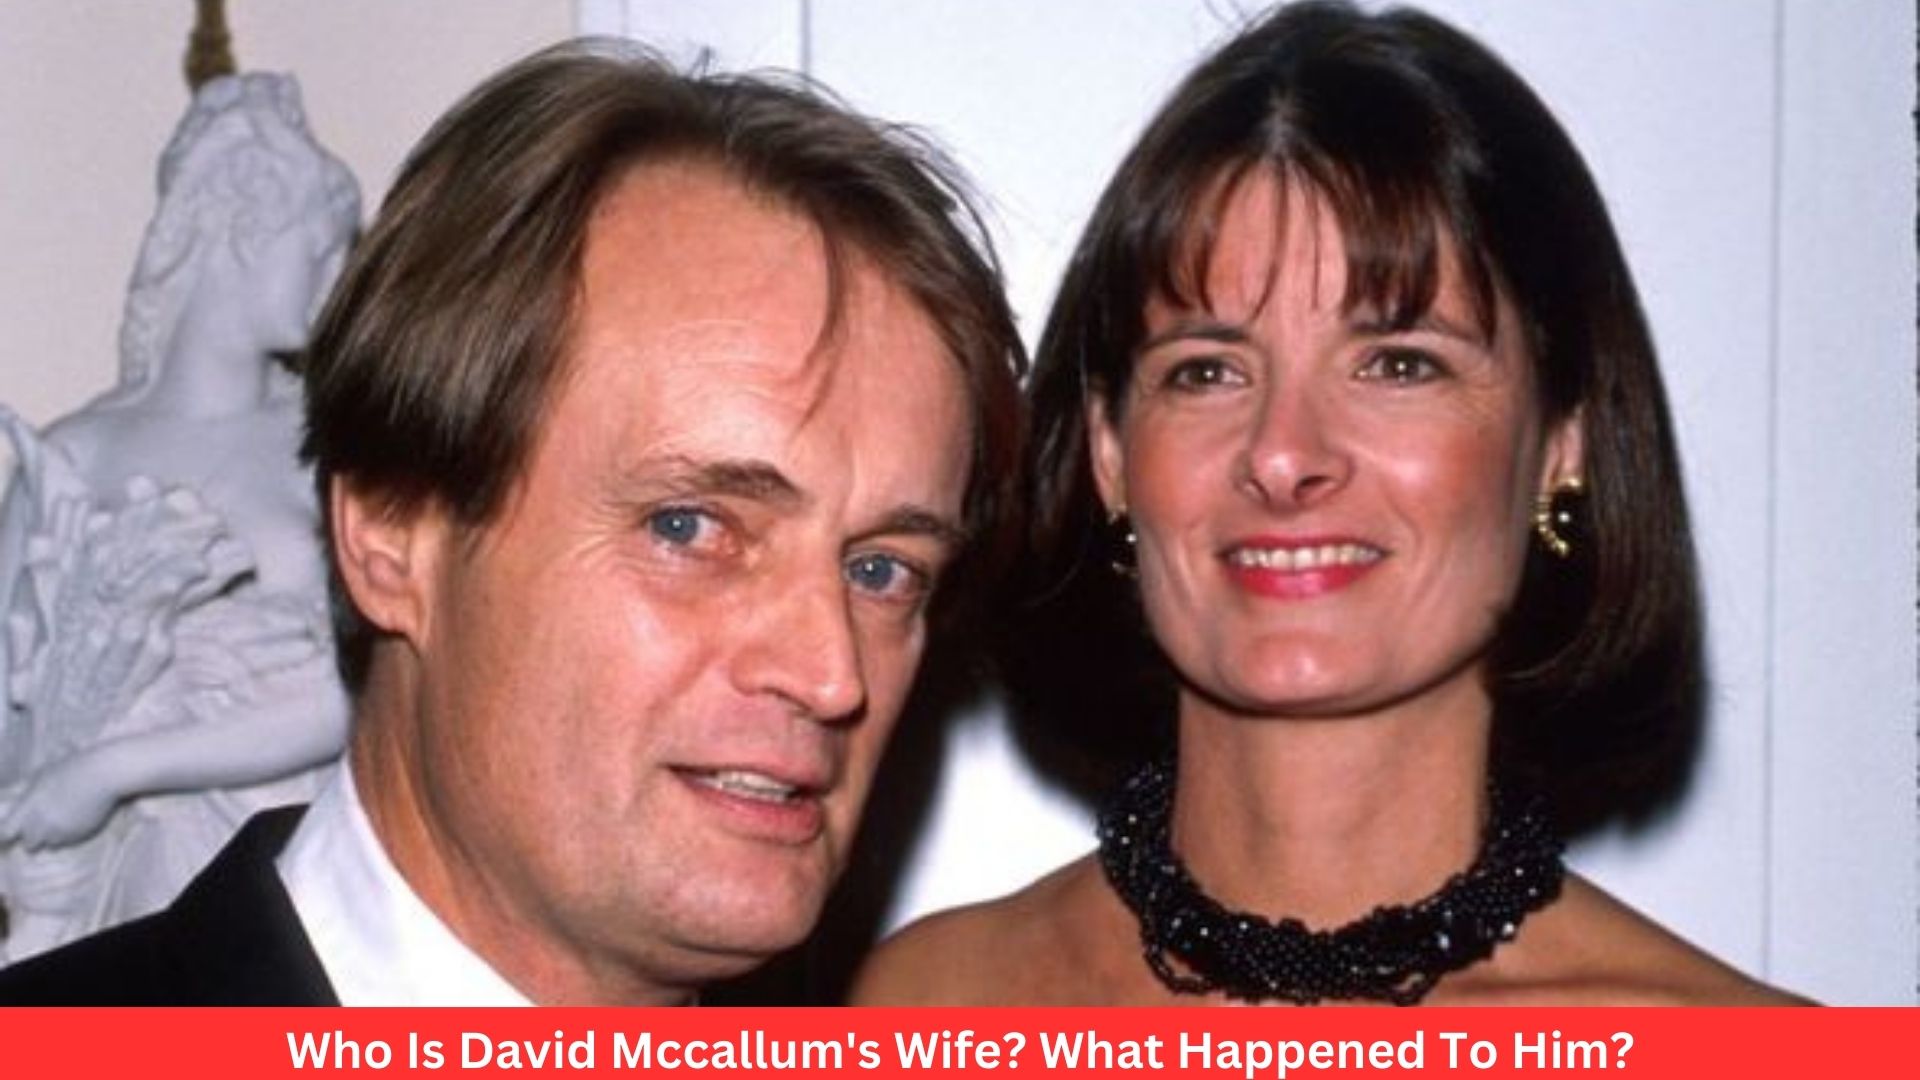 Who Is David Mccallum's Wife? What Happened To Him?